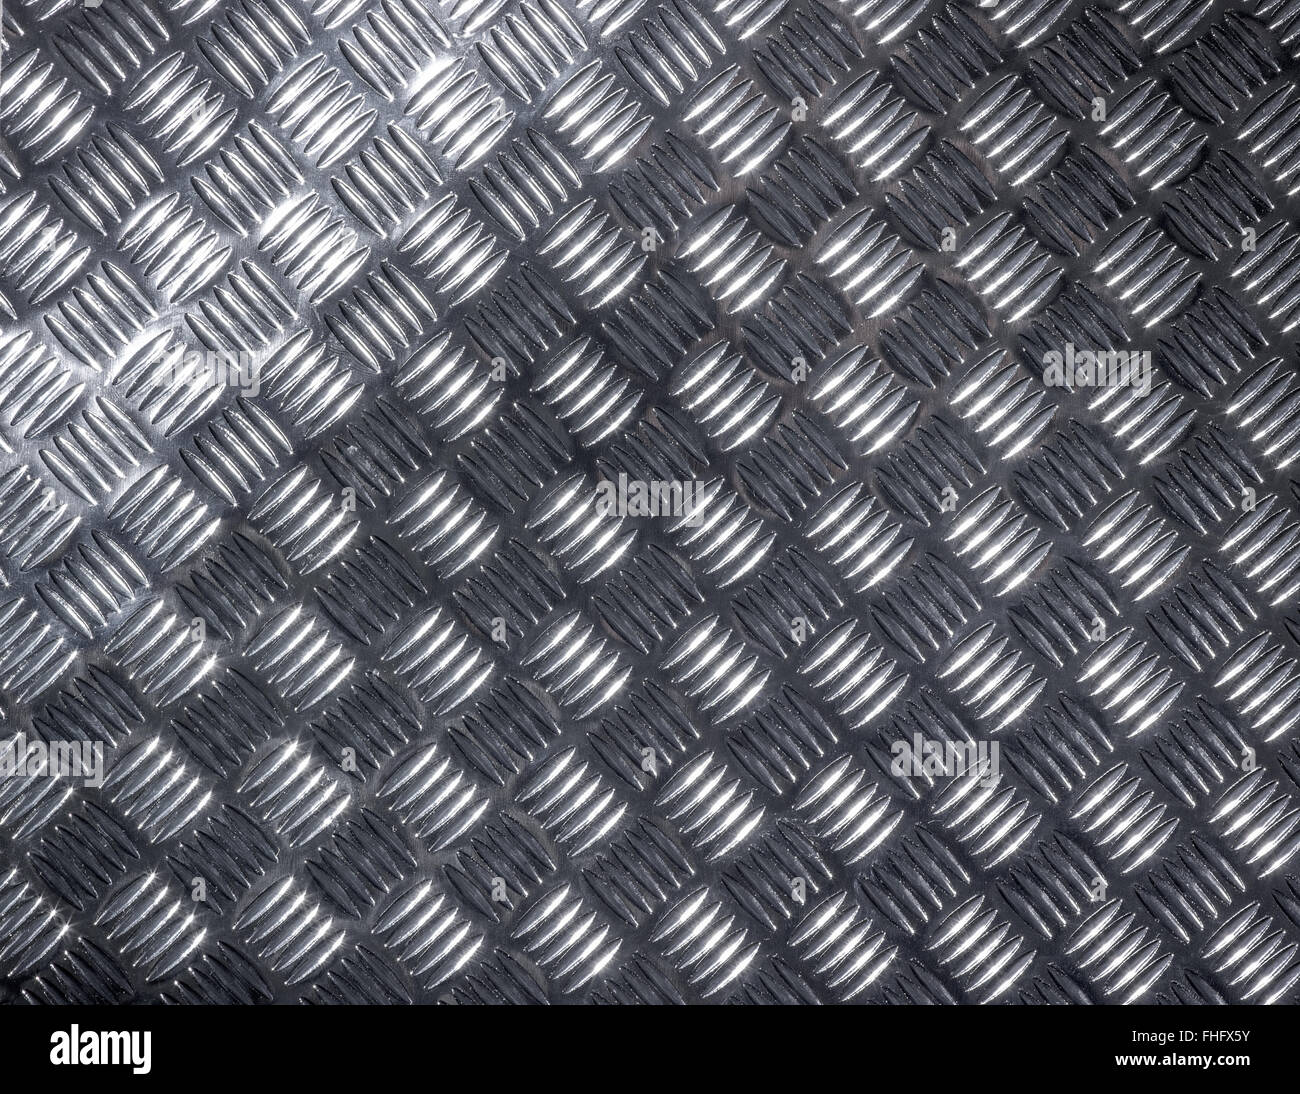 full frame abstract stud plate background Stock Photo